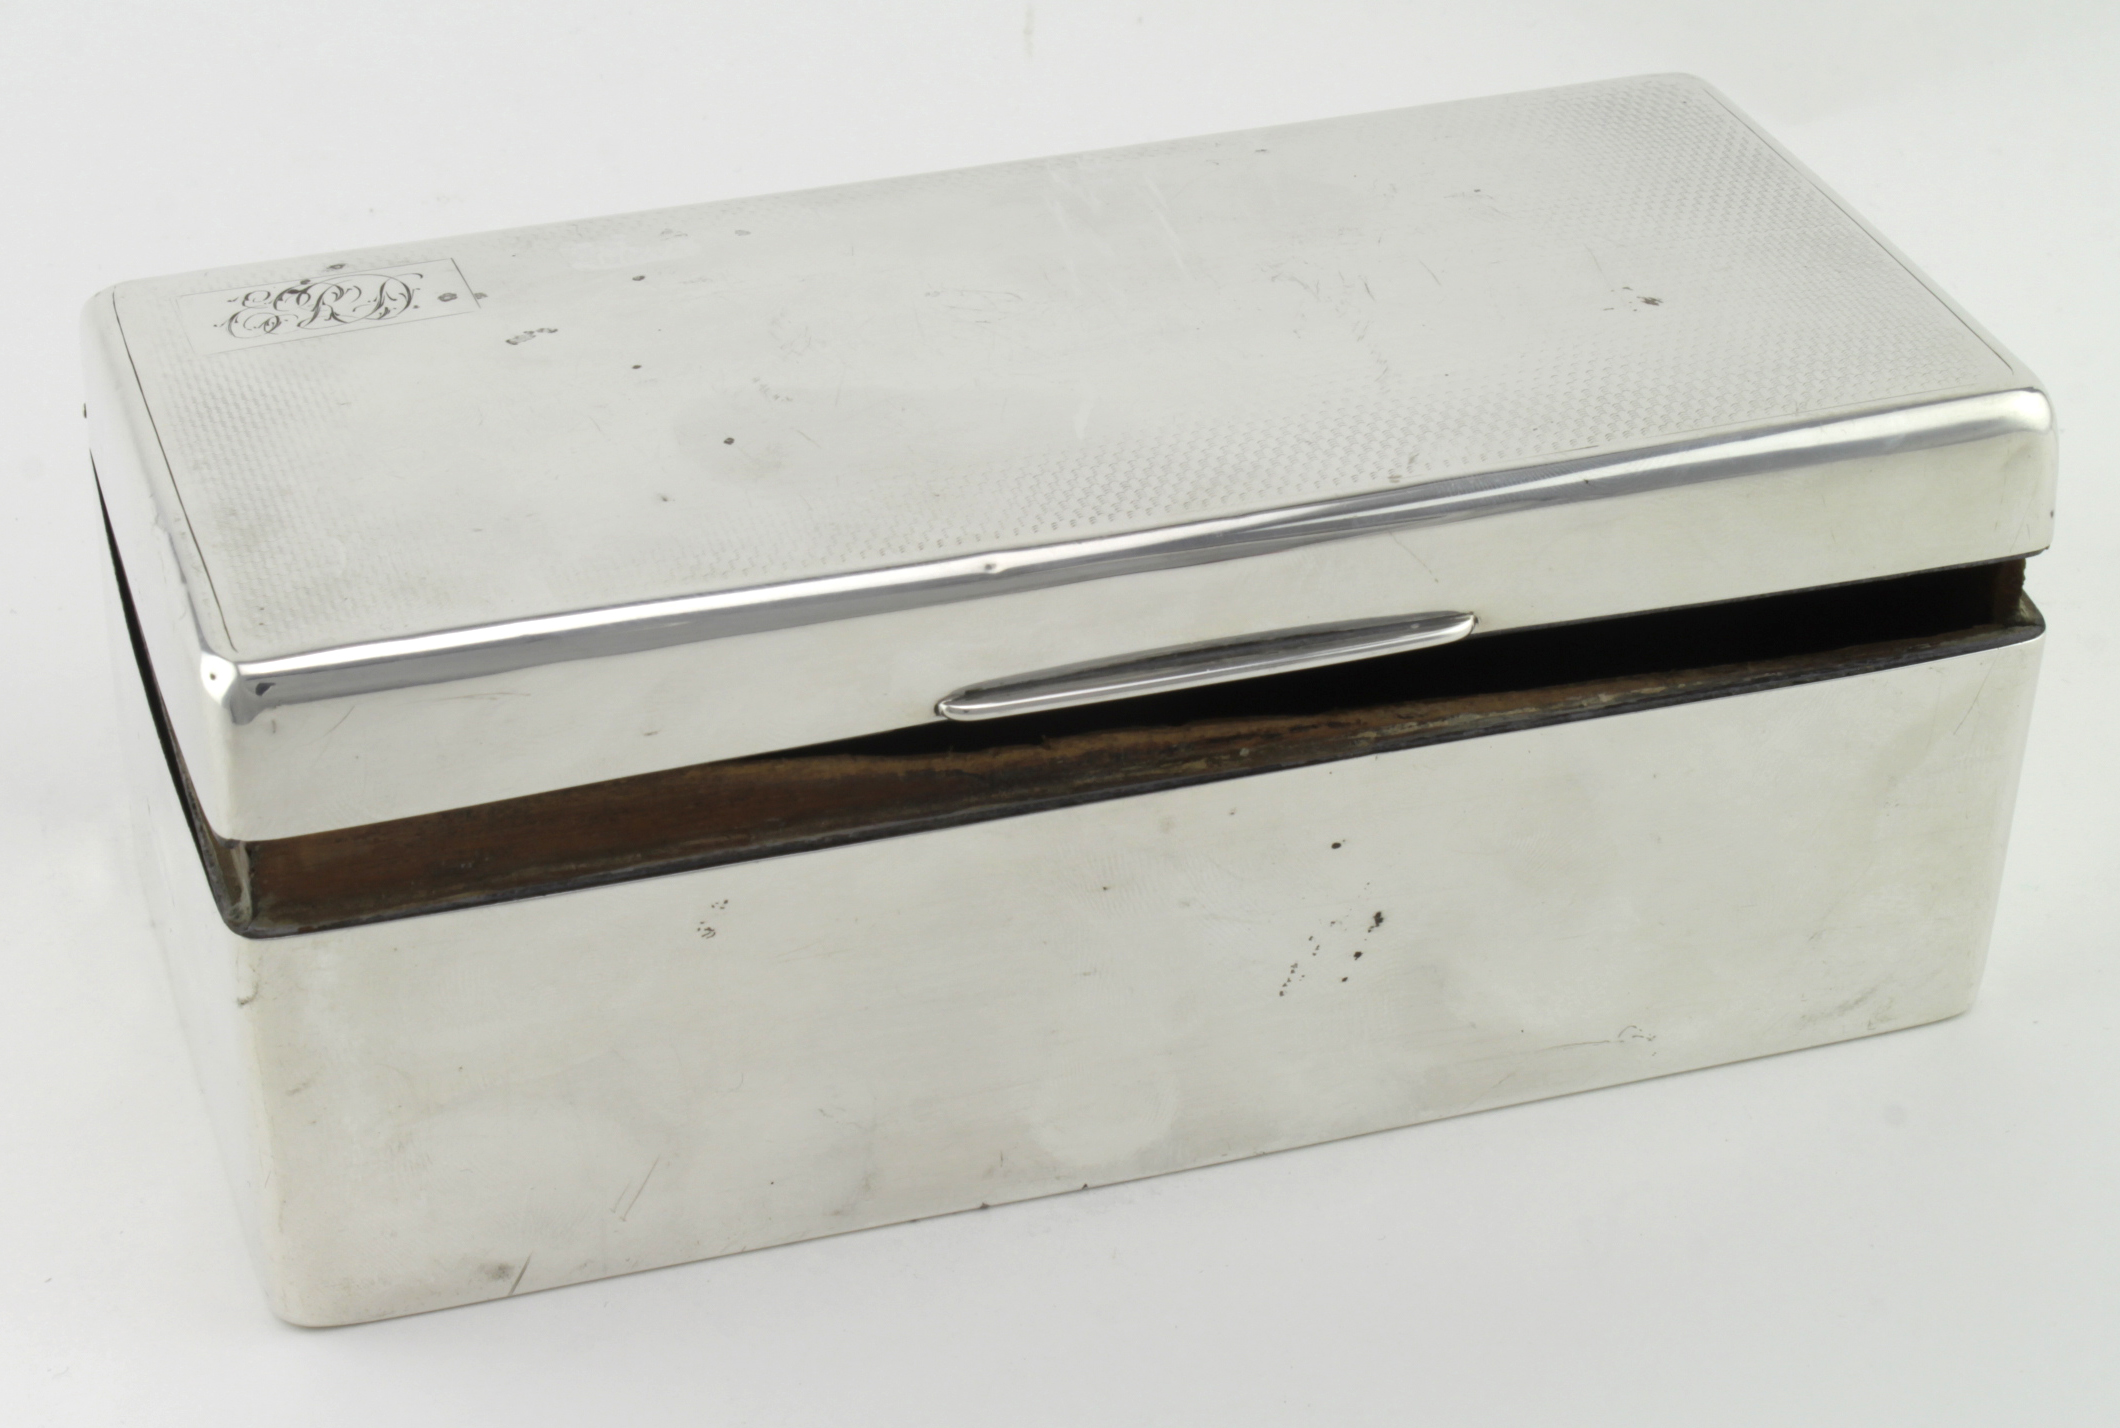 Silver cigarette box with a wooden interior which has some damage - silver hallmarks very rubbed and